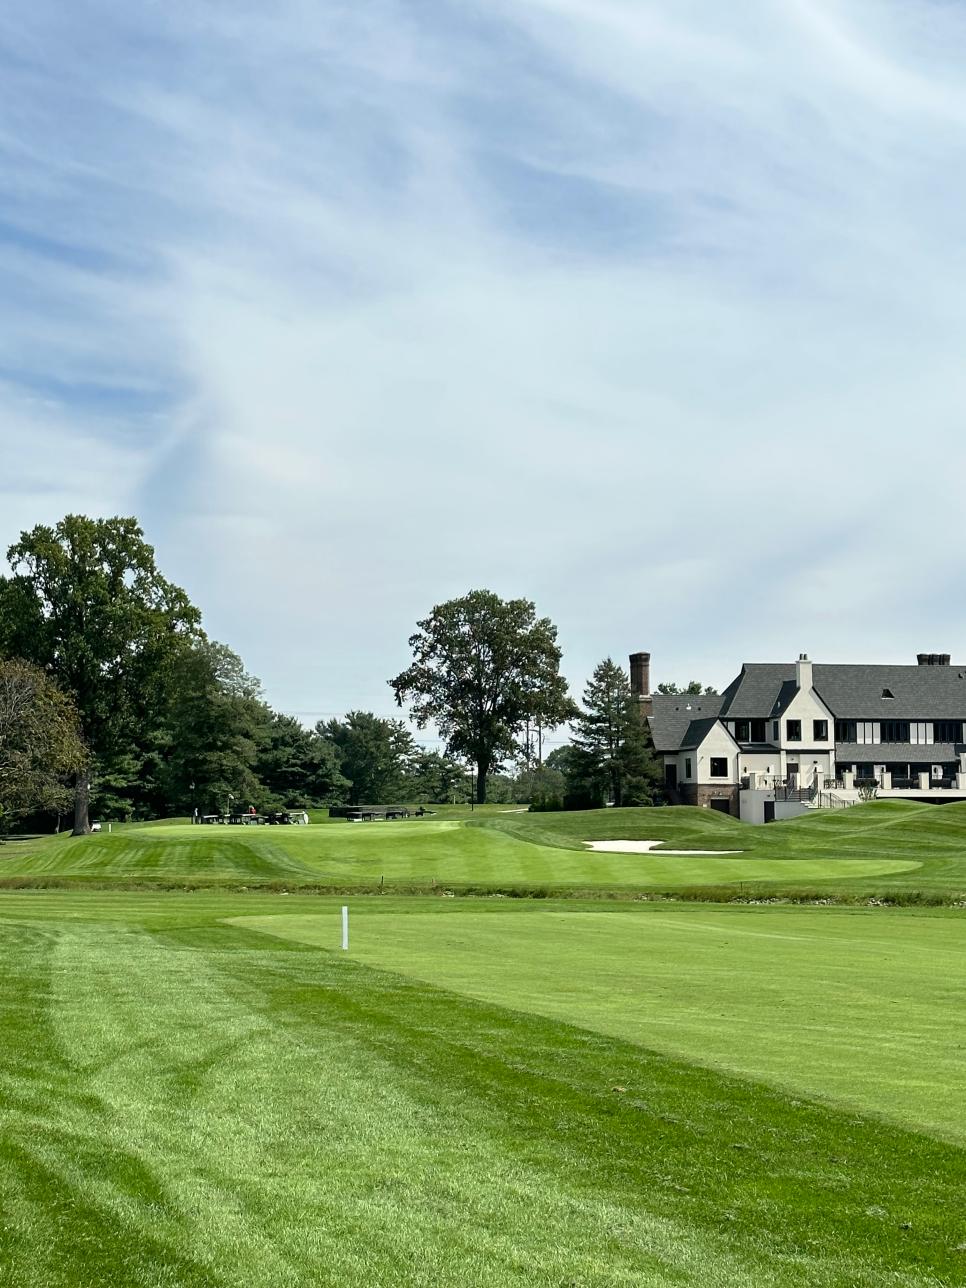 /content/dam/images/golfdigest/fullset/course-photos-for-places-to-play/suneagles-new-jersey-sixth-hole-7510.jpg